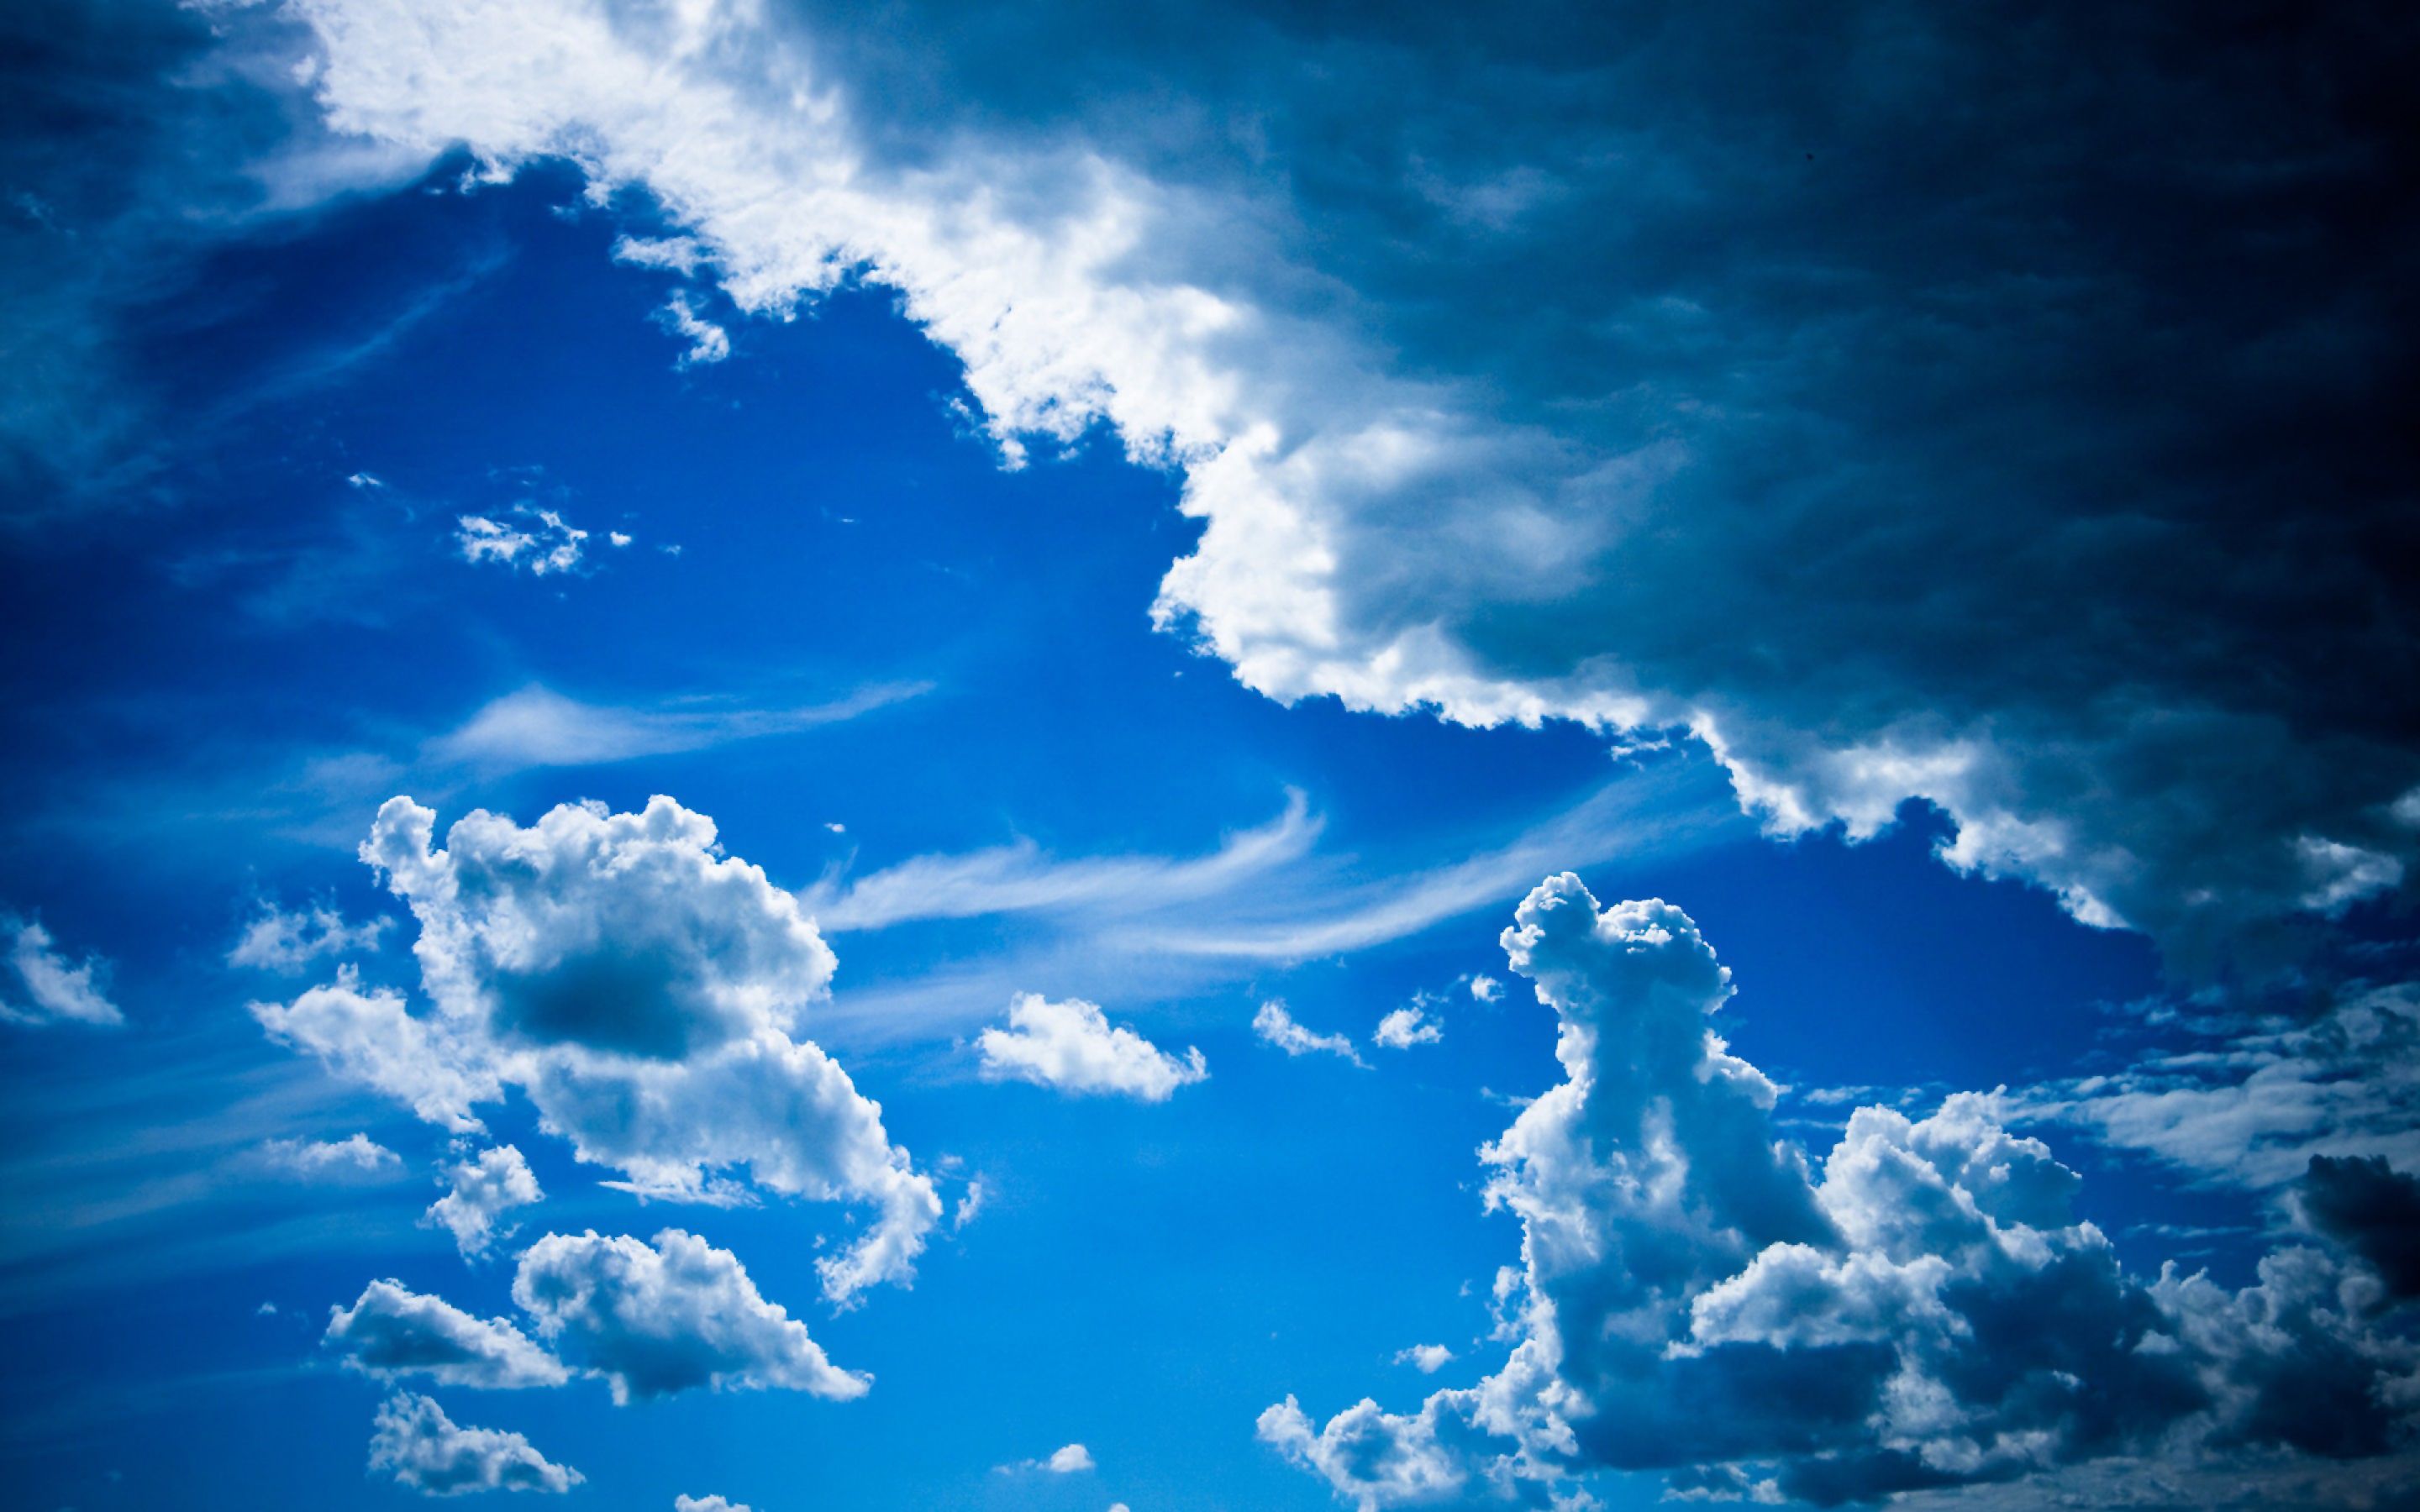 Download Cloudy Sky HD 33813 2880x1800 px High Definition Wallpaper